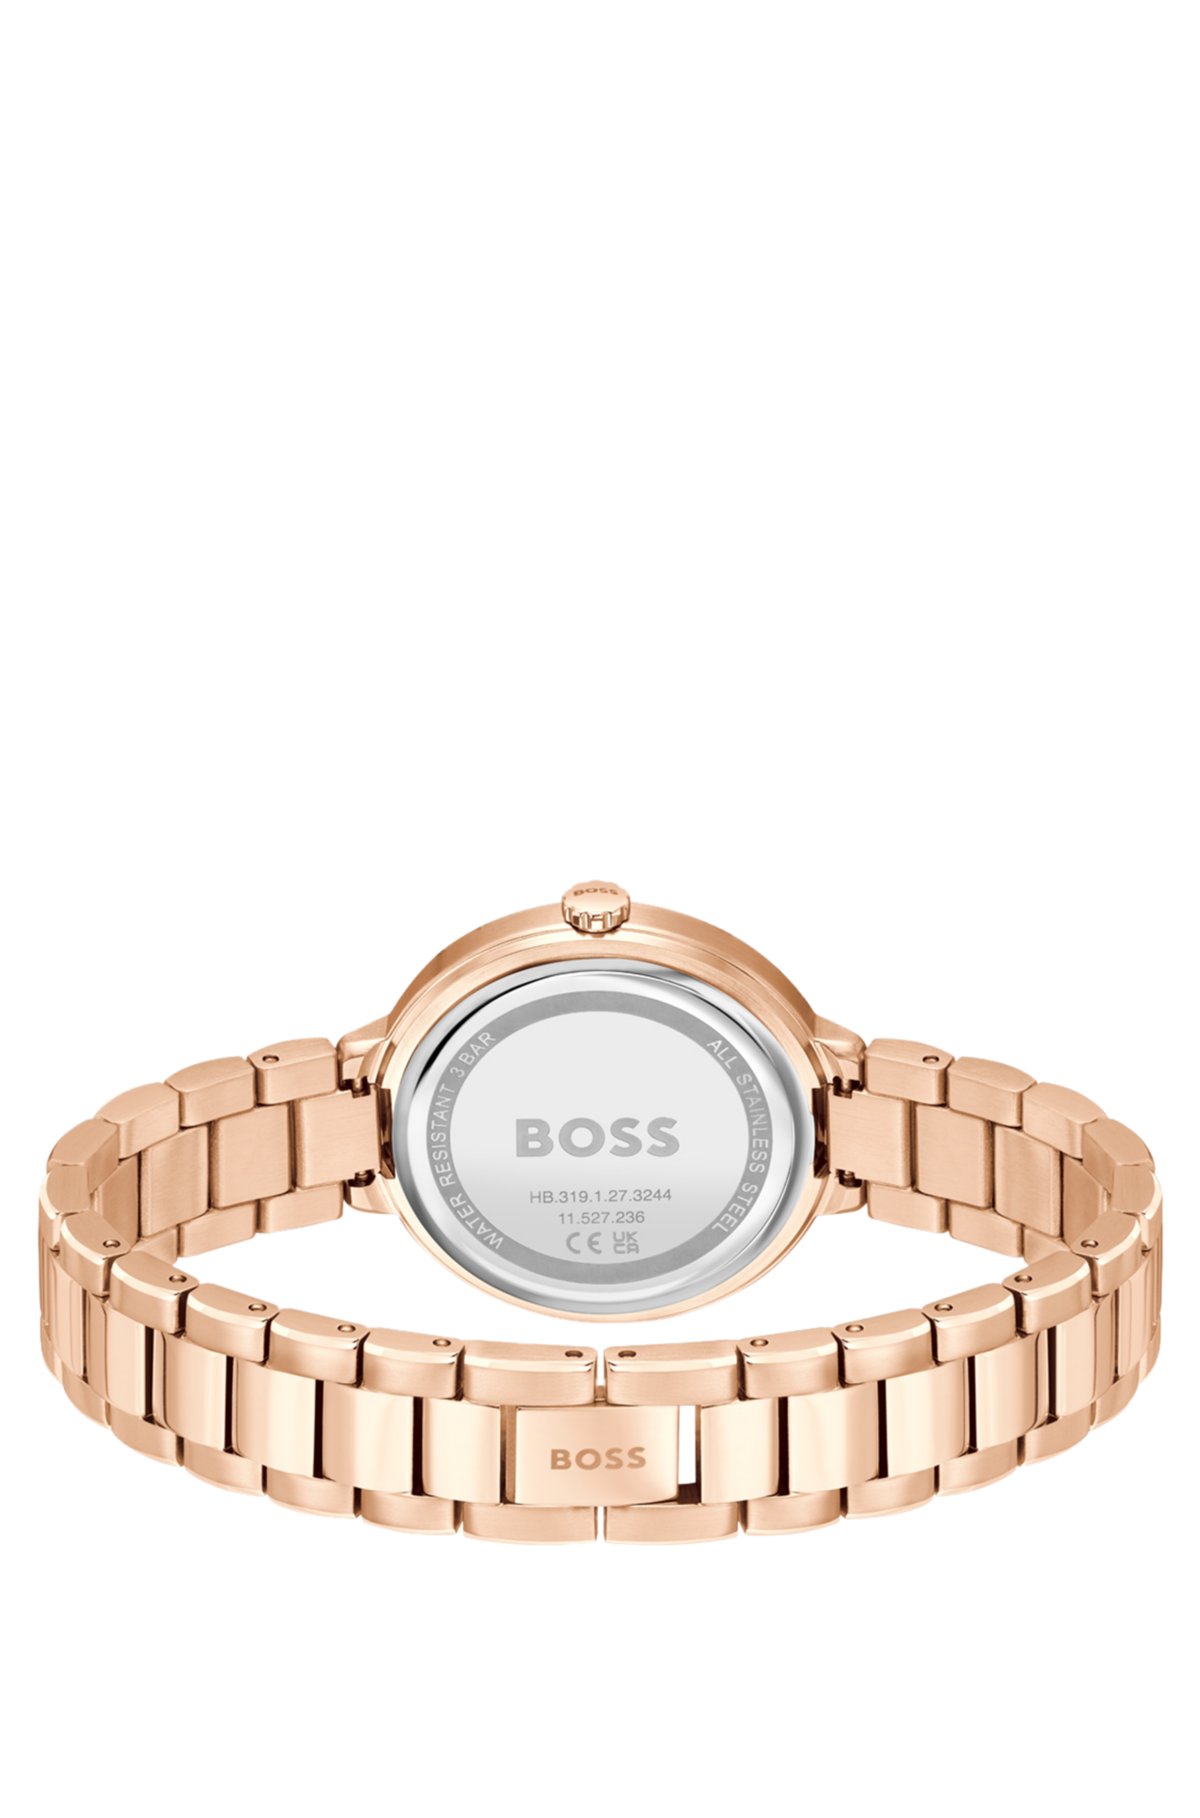 Link-bracelet watch with crystal-studded monogram dial, Gold